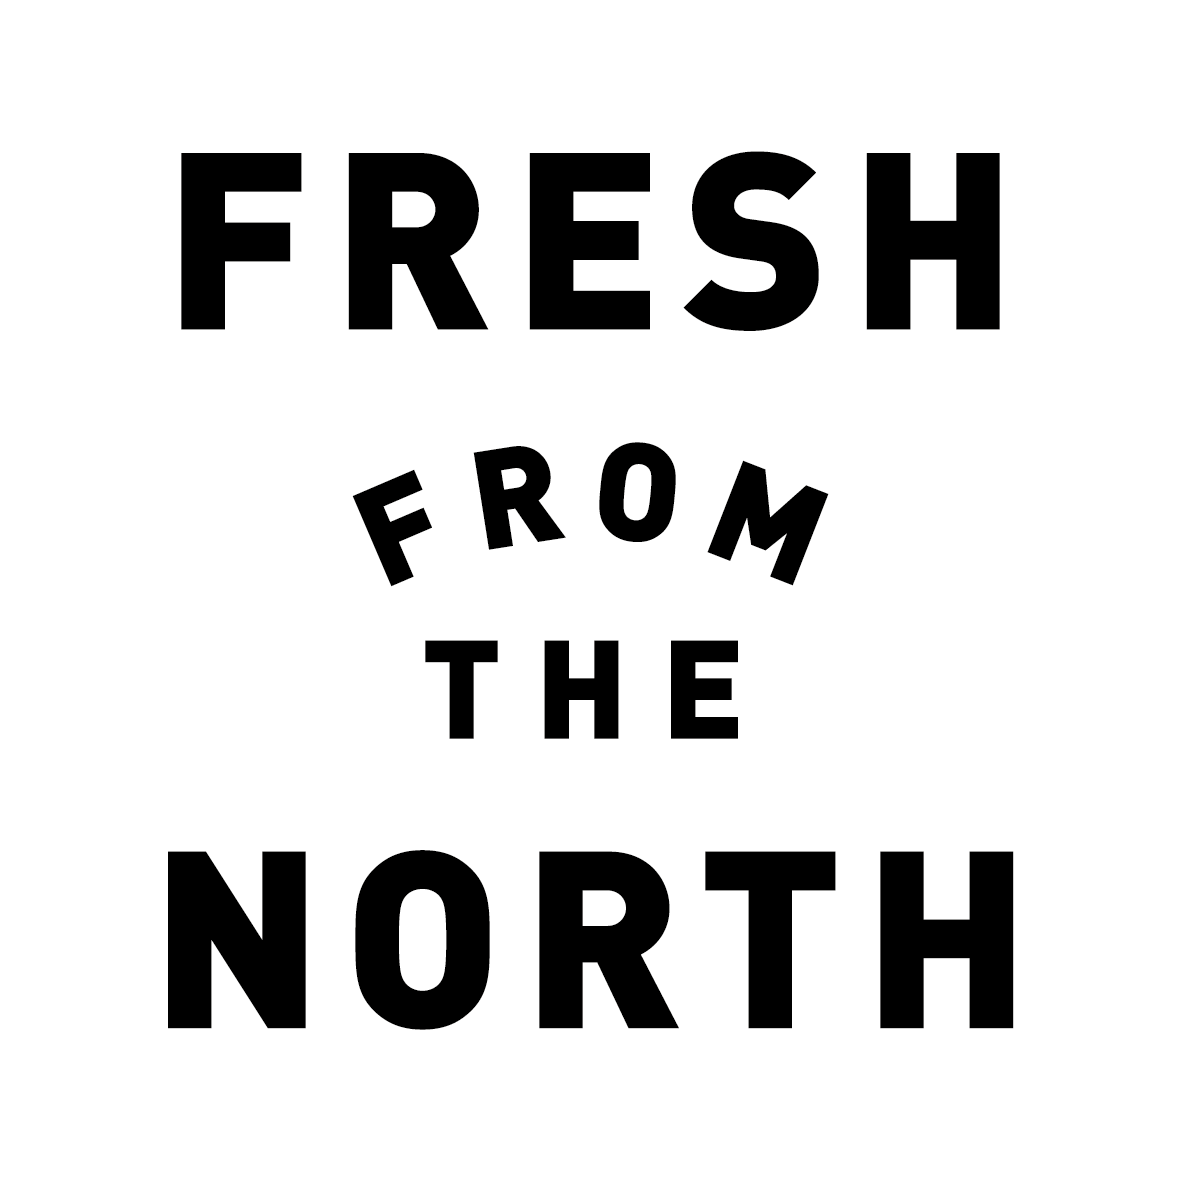 Northern Monk Brewing Co